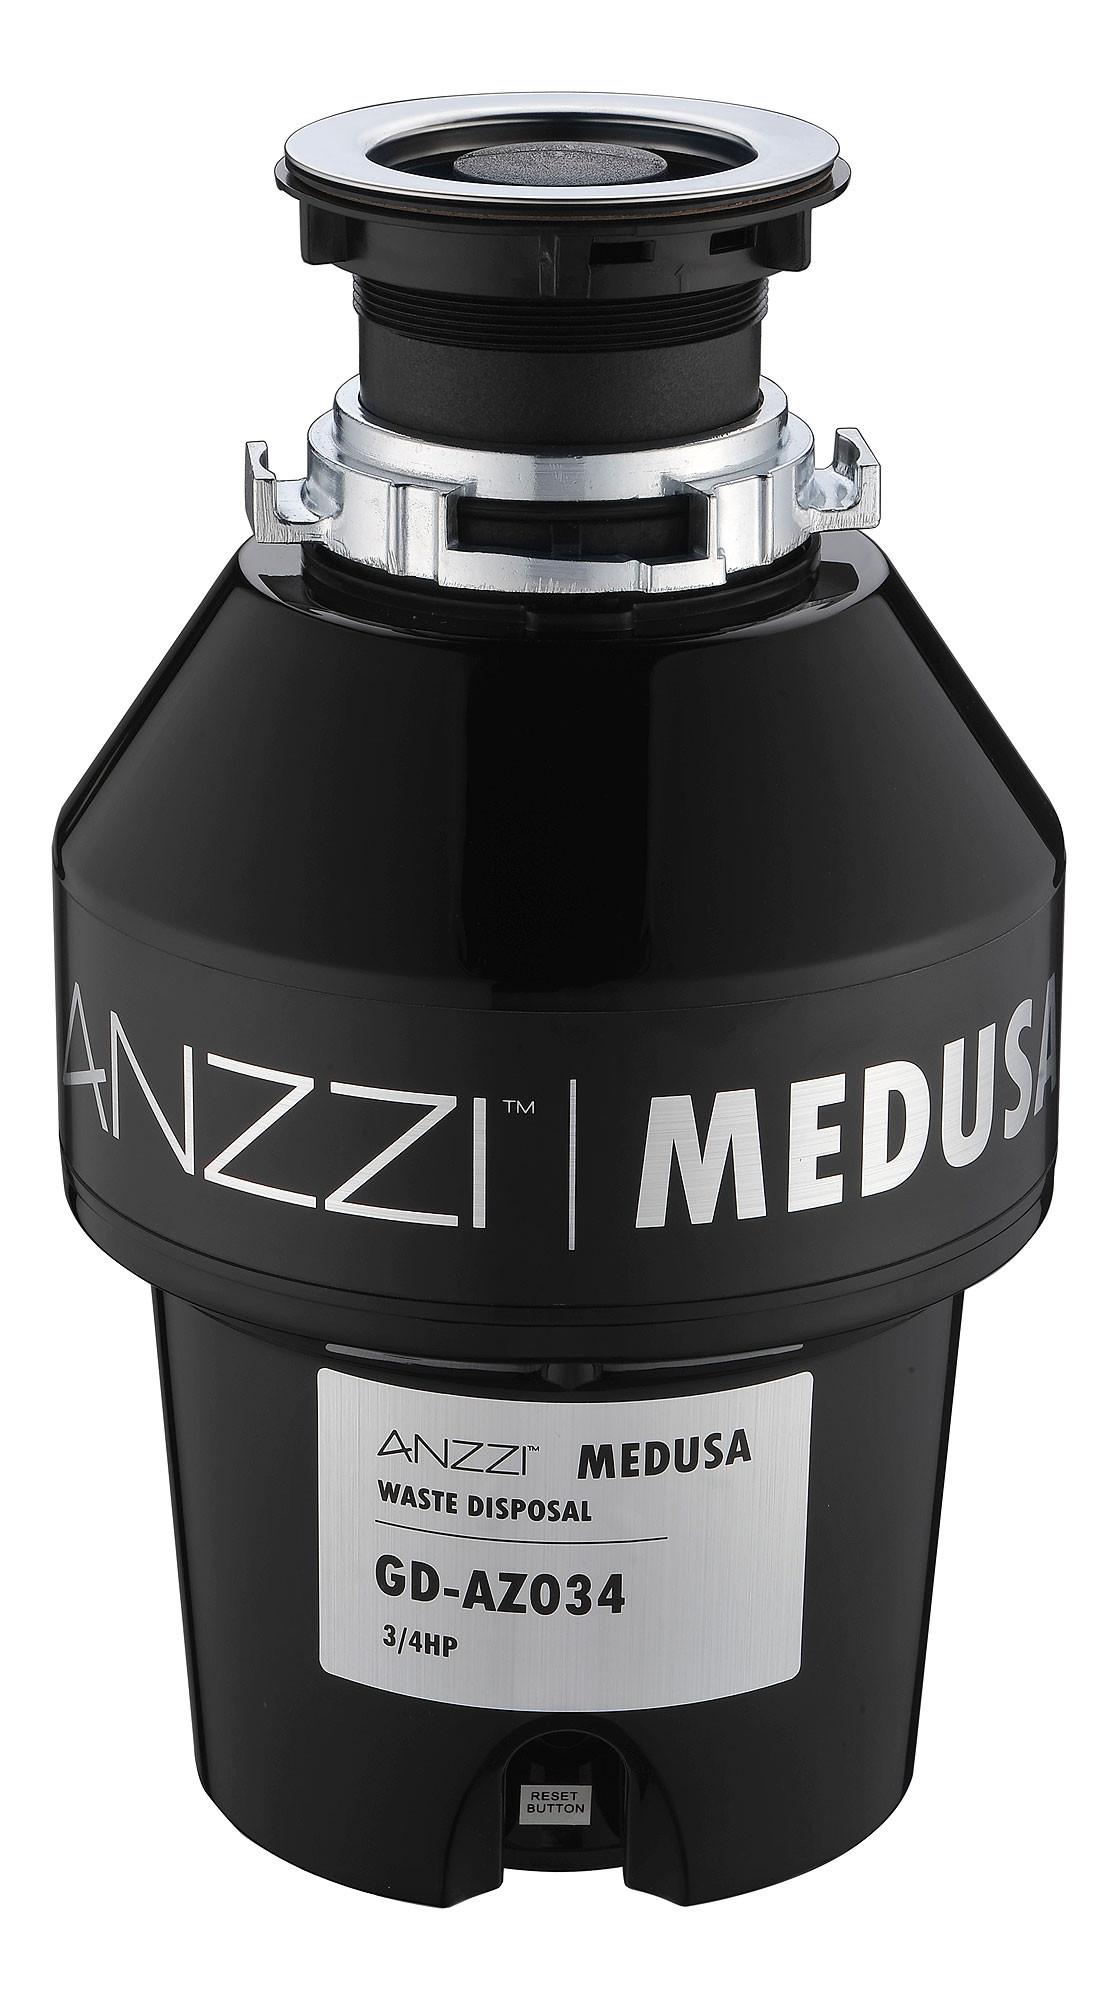 ANZZI GD-AZ034 MEDUSA Series 3/4 HP Continuous Garbage Disposal In Black